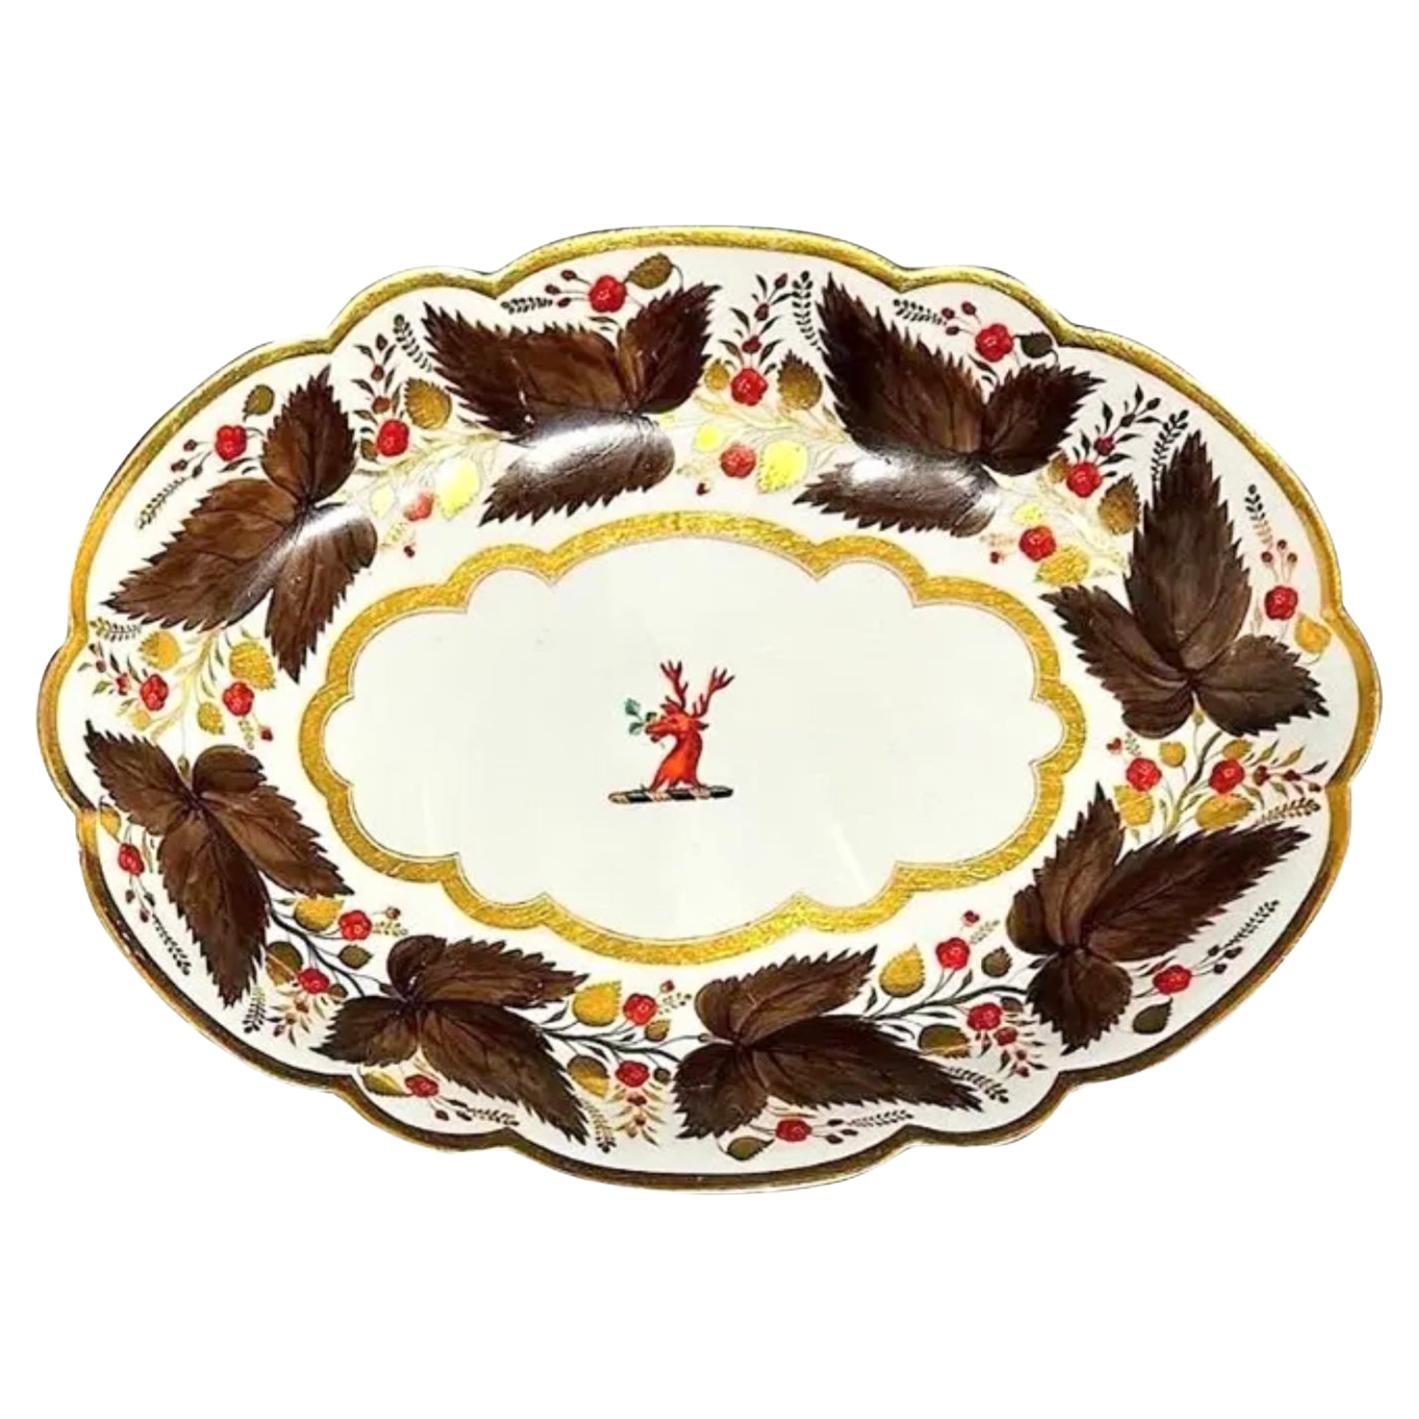 Flight Barr & Barr Oval Platter or Tray w Brown Vines & Berries, 1815-1820